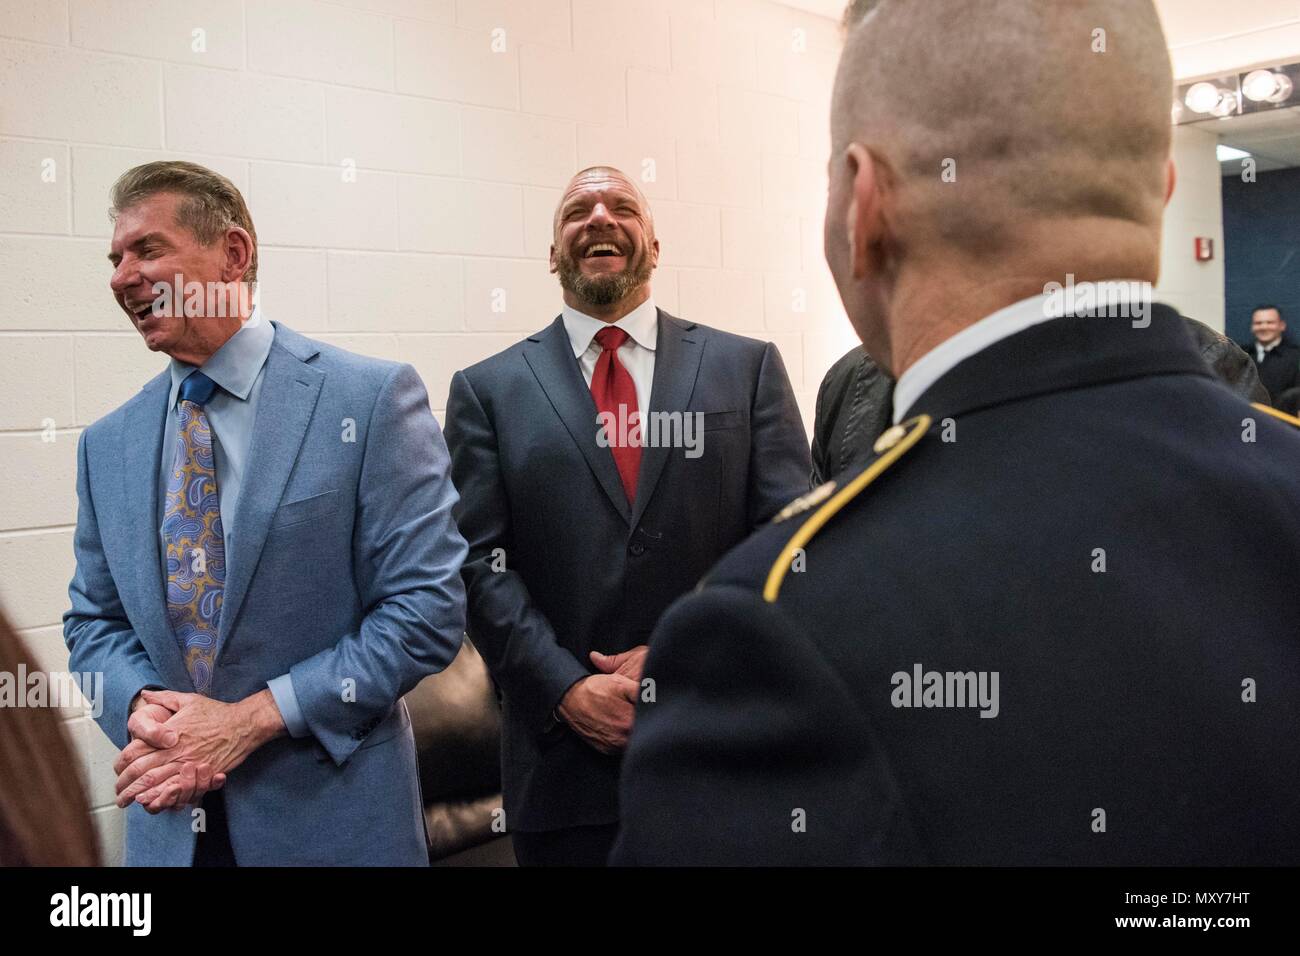 WWE CEO Vince McMahon and Paul 'Triple H' Levesque speak to Army Command Sgt. Maj. John W. Troxell, Senior Enlisted Advisor to the Chairman  of the Joint Chiefs of Staff, before the 14th Annual Tribute to the Troops Event at the Verizon Center in Washington, D.C., Dec. 13, 2016. WWE Tribute to the Troops is an annual event held by WWE and Armed Forces Entertainment in December during the holiday season since 2003, to honor and entertain United States Armed Forces members. WWE performers and employees travel to military camps, bases and hospitals, including the Walter Reed Army Medical Center a Stock Photo